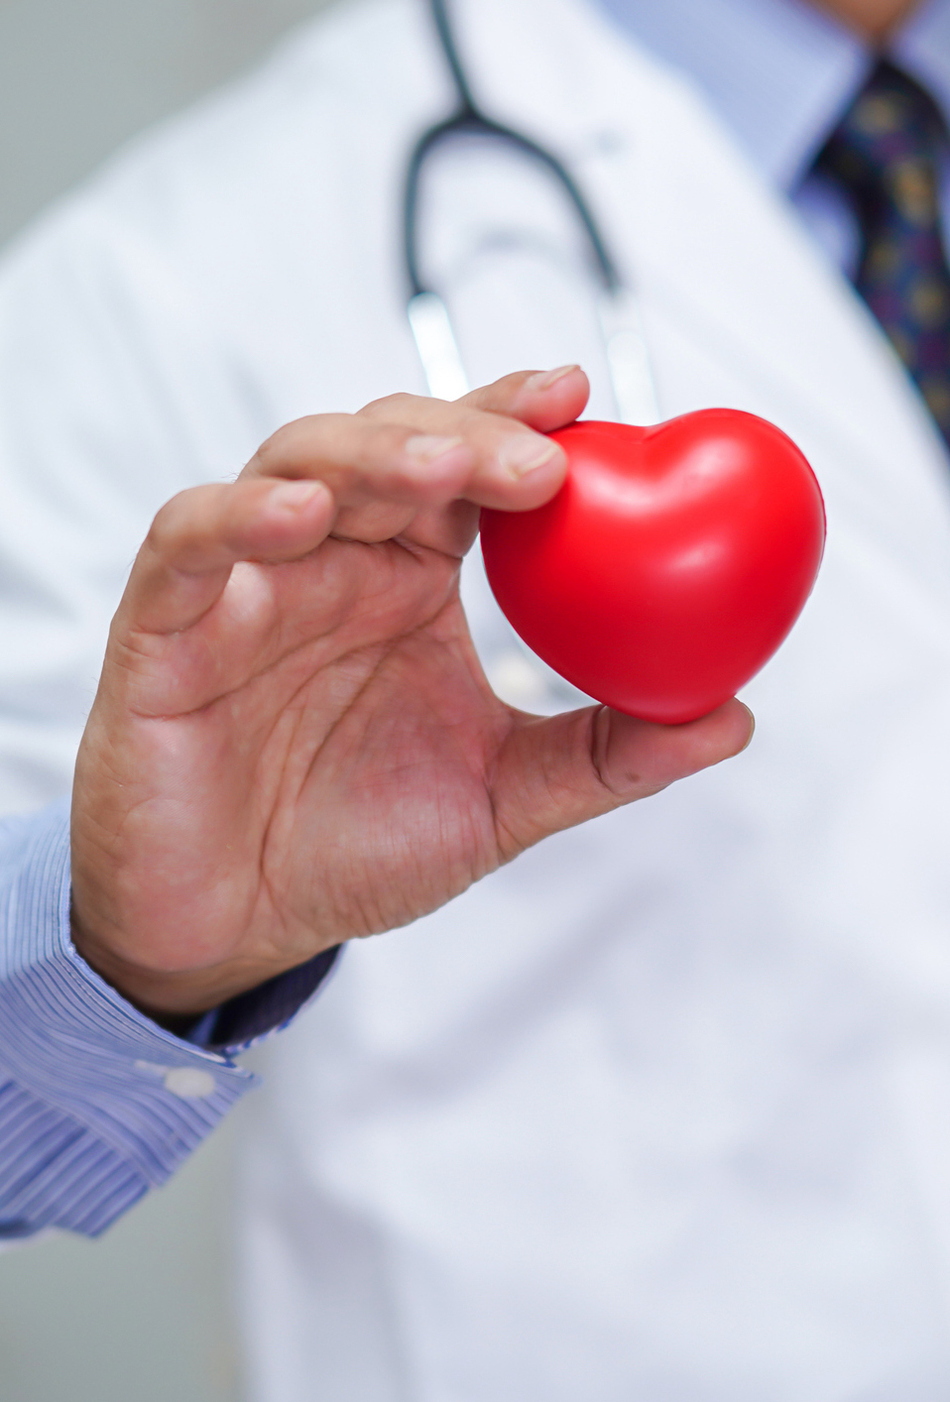 Seven Questions for a Cardiologist